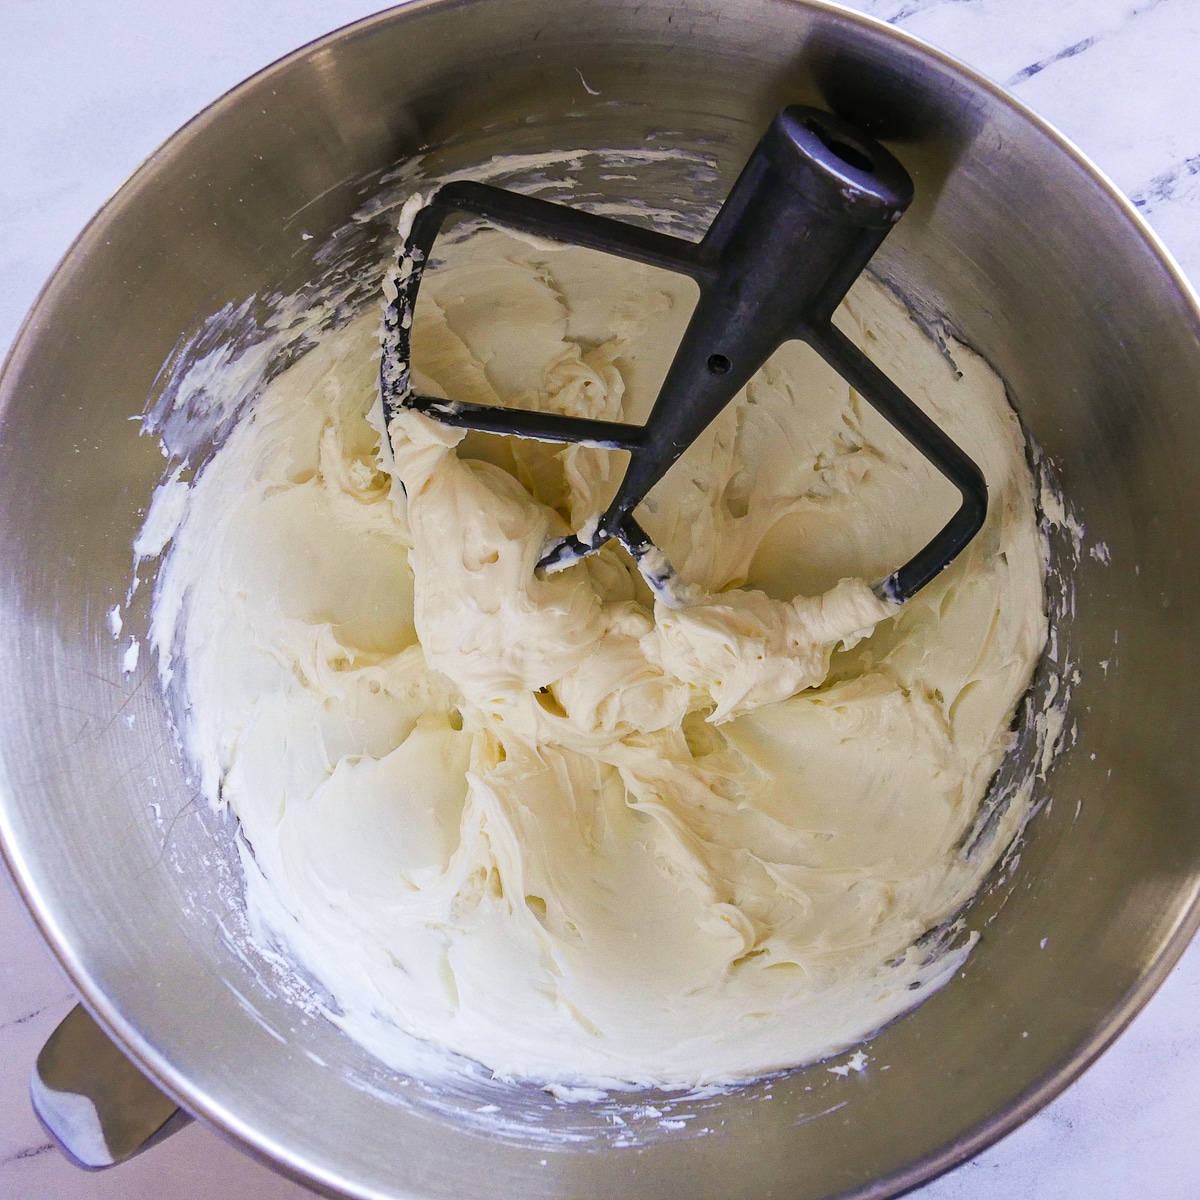 Cream cheese and powdered sugar beat together using a stand mixer.